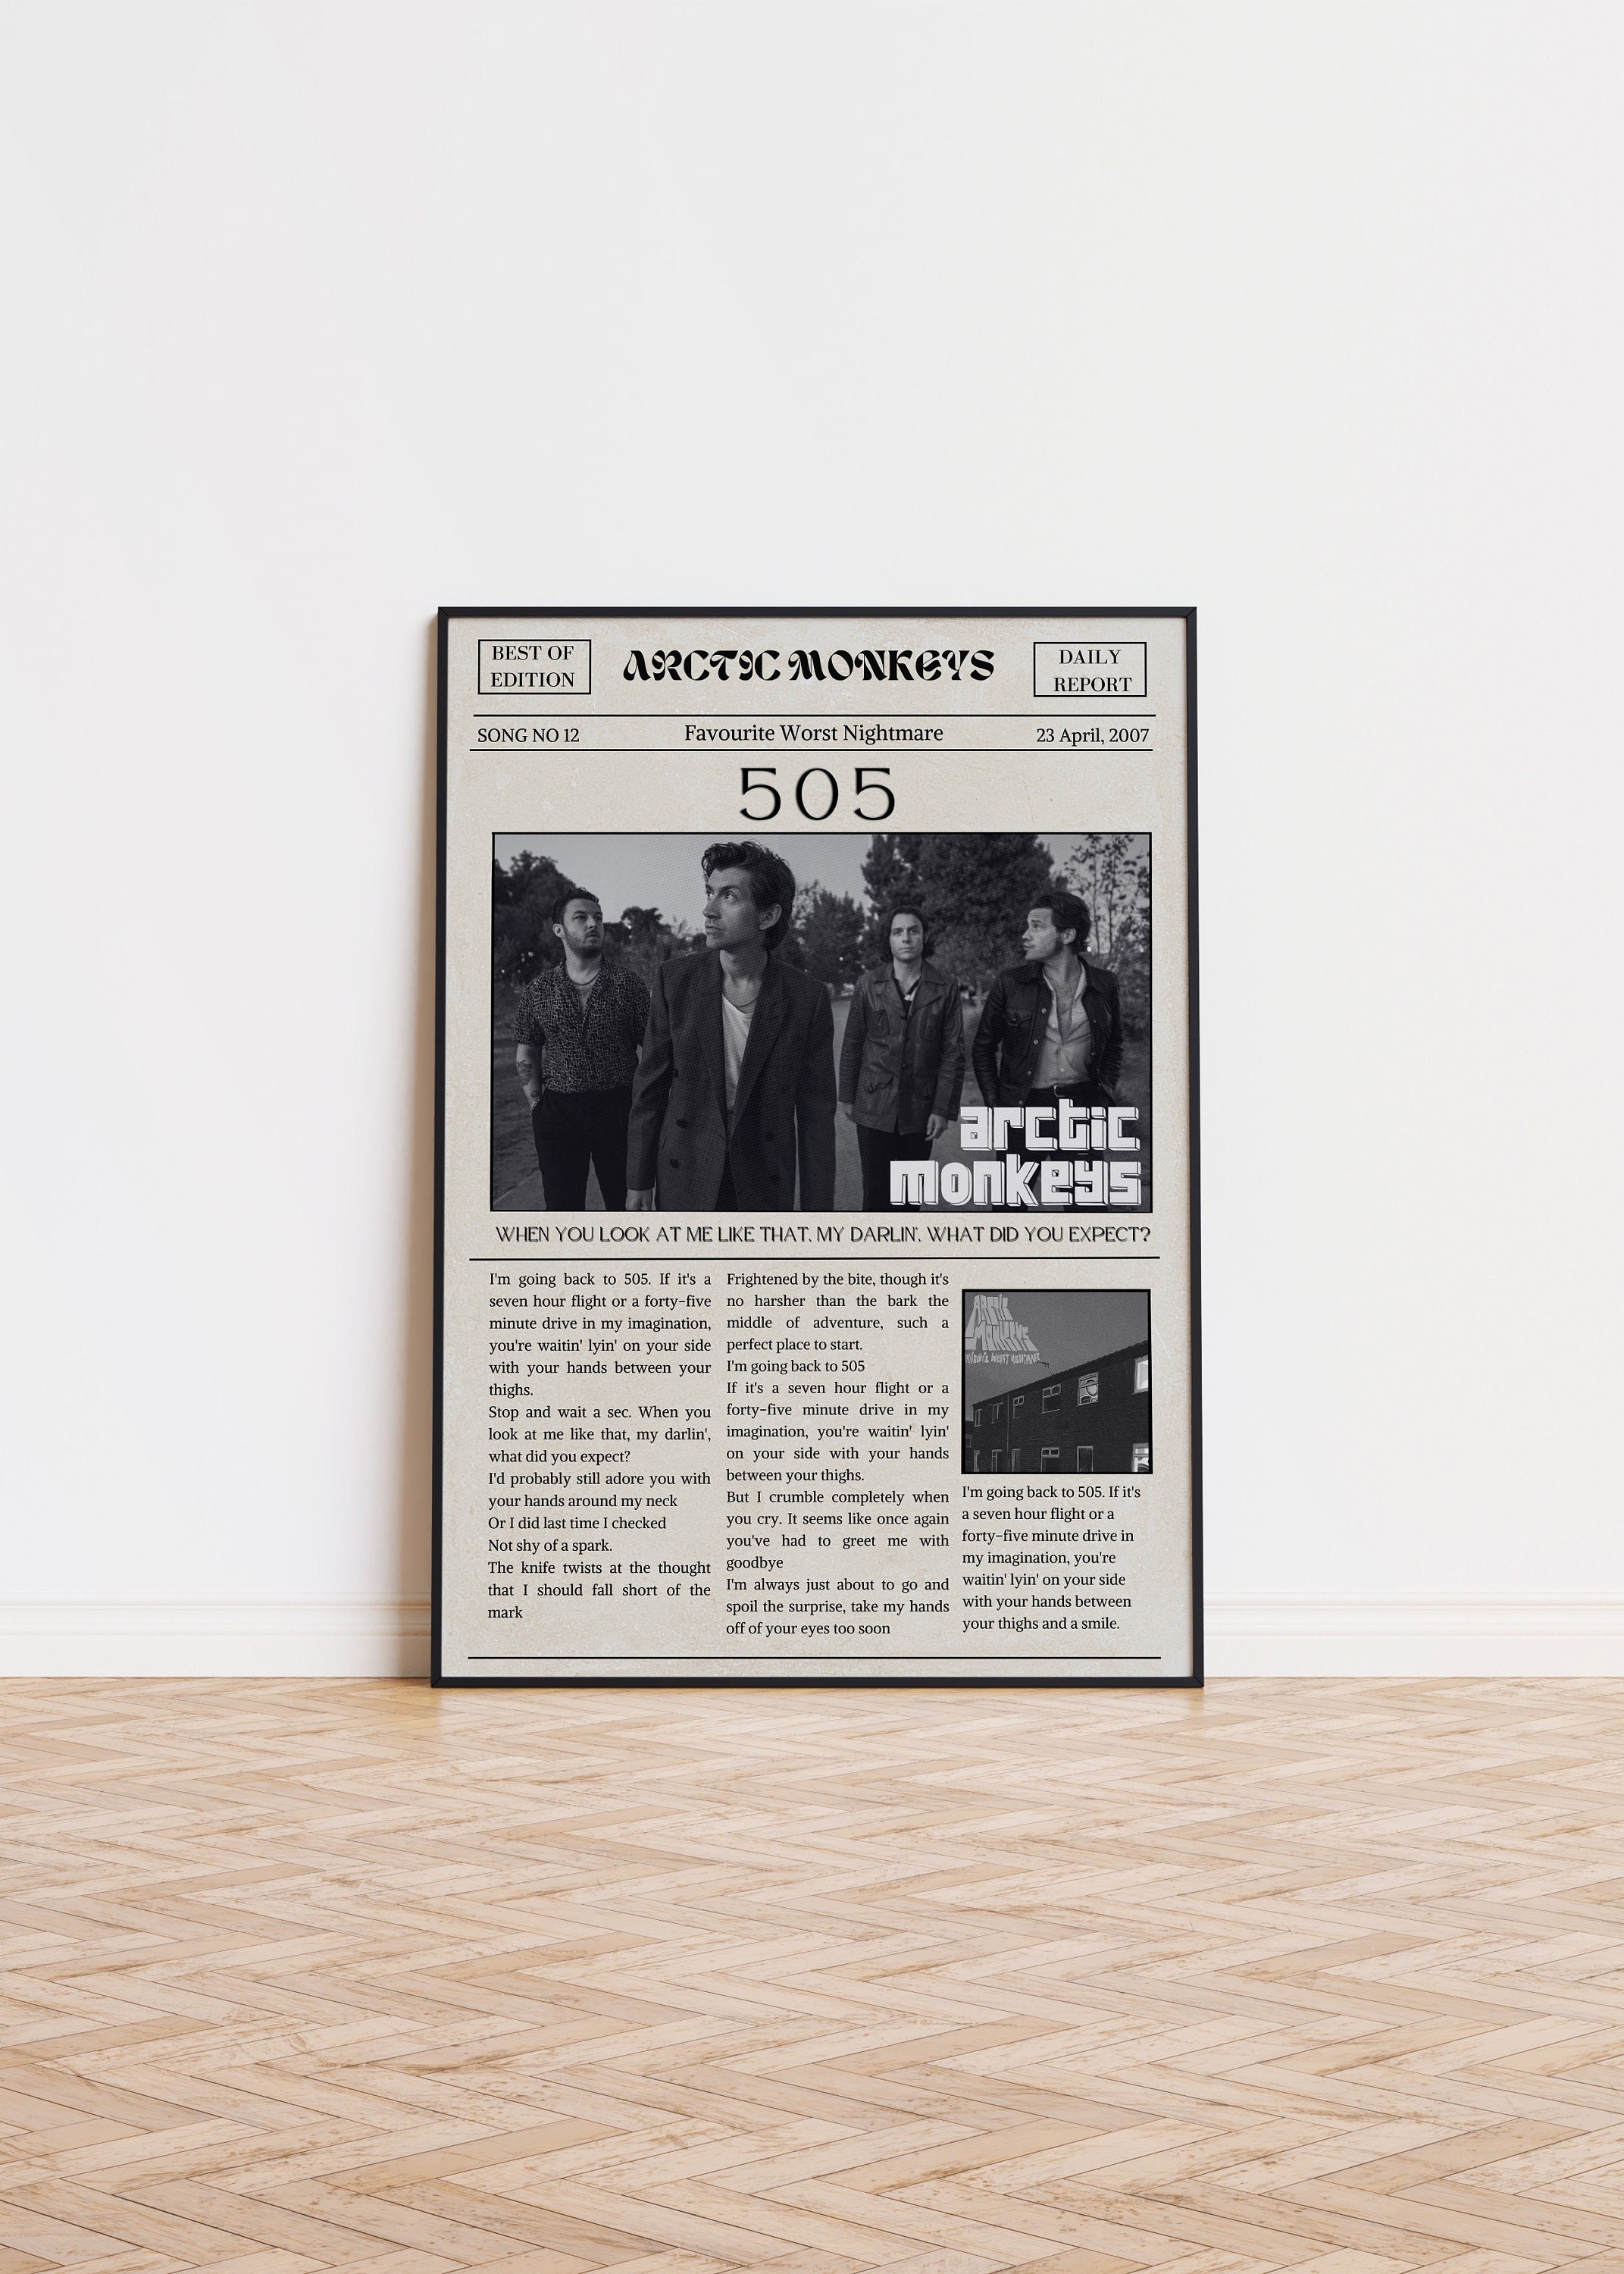 Arctic Monkeys Vintage Kraft Paper Poster Diy Wall Art For Home Decor ▻   ▻ Free Shipping ▻ Up to 70% OFF